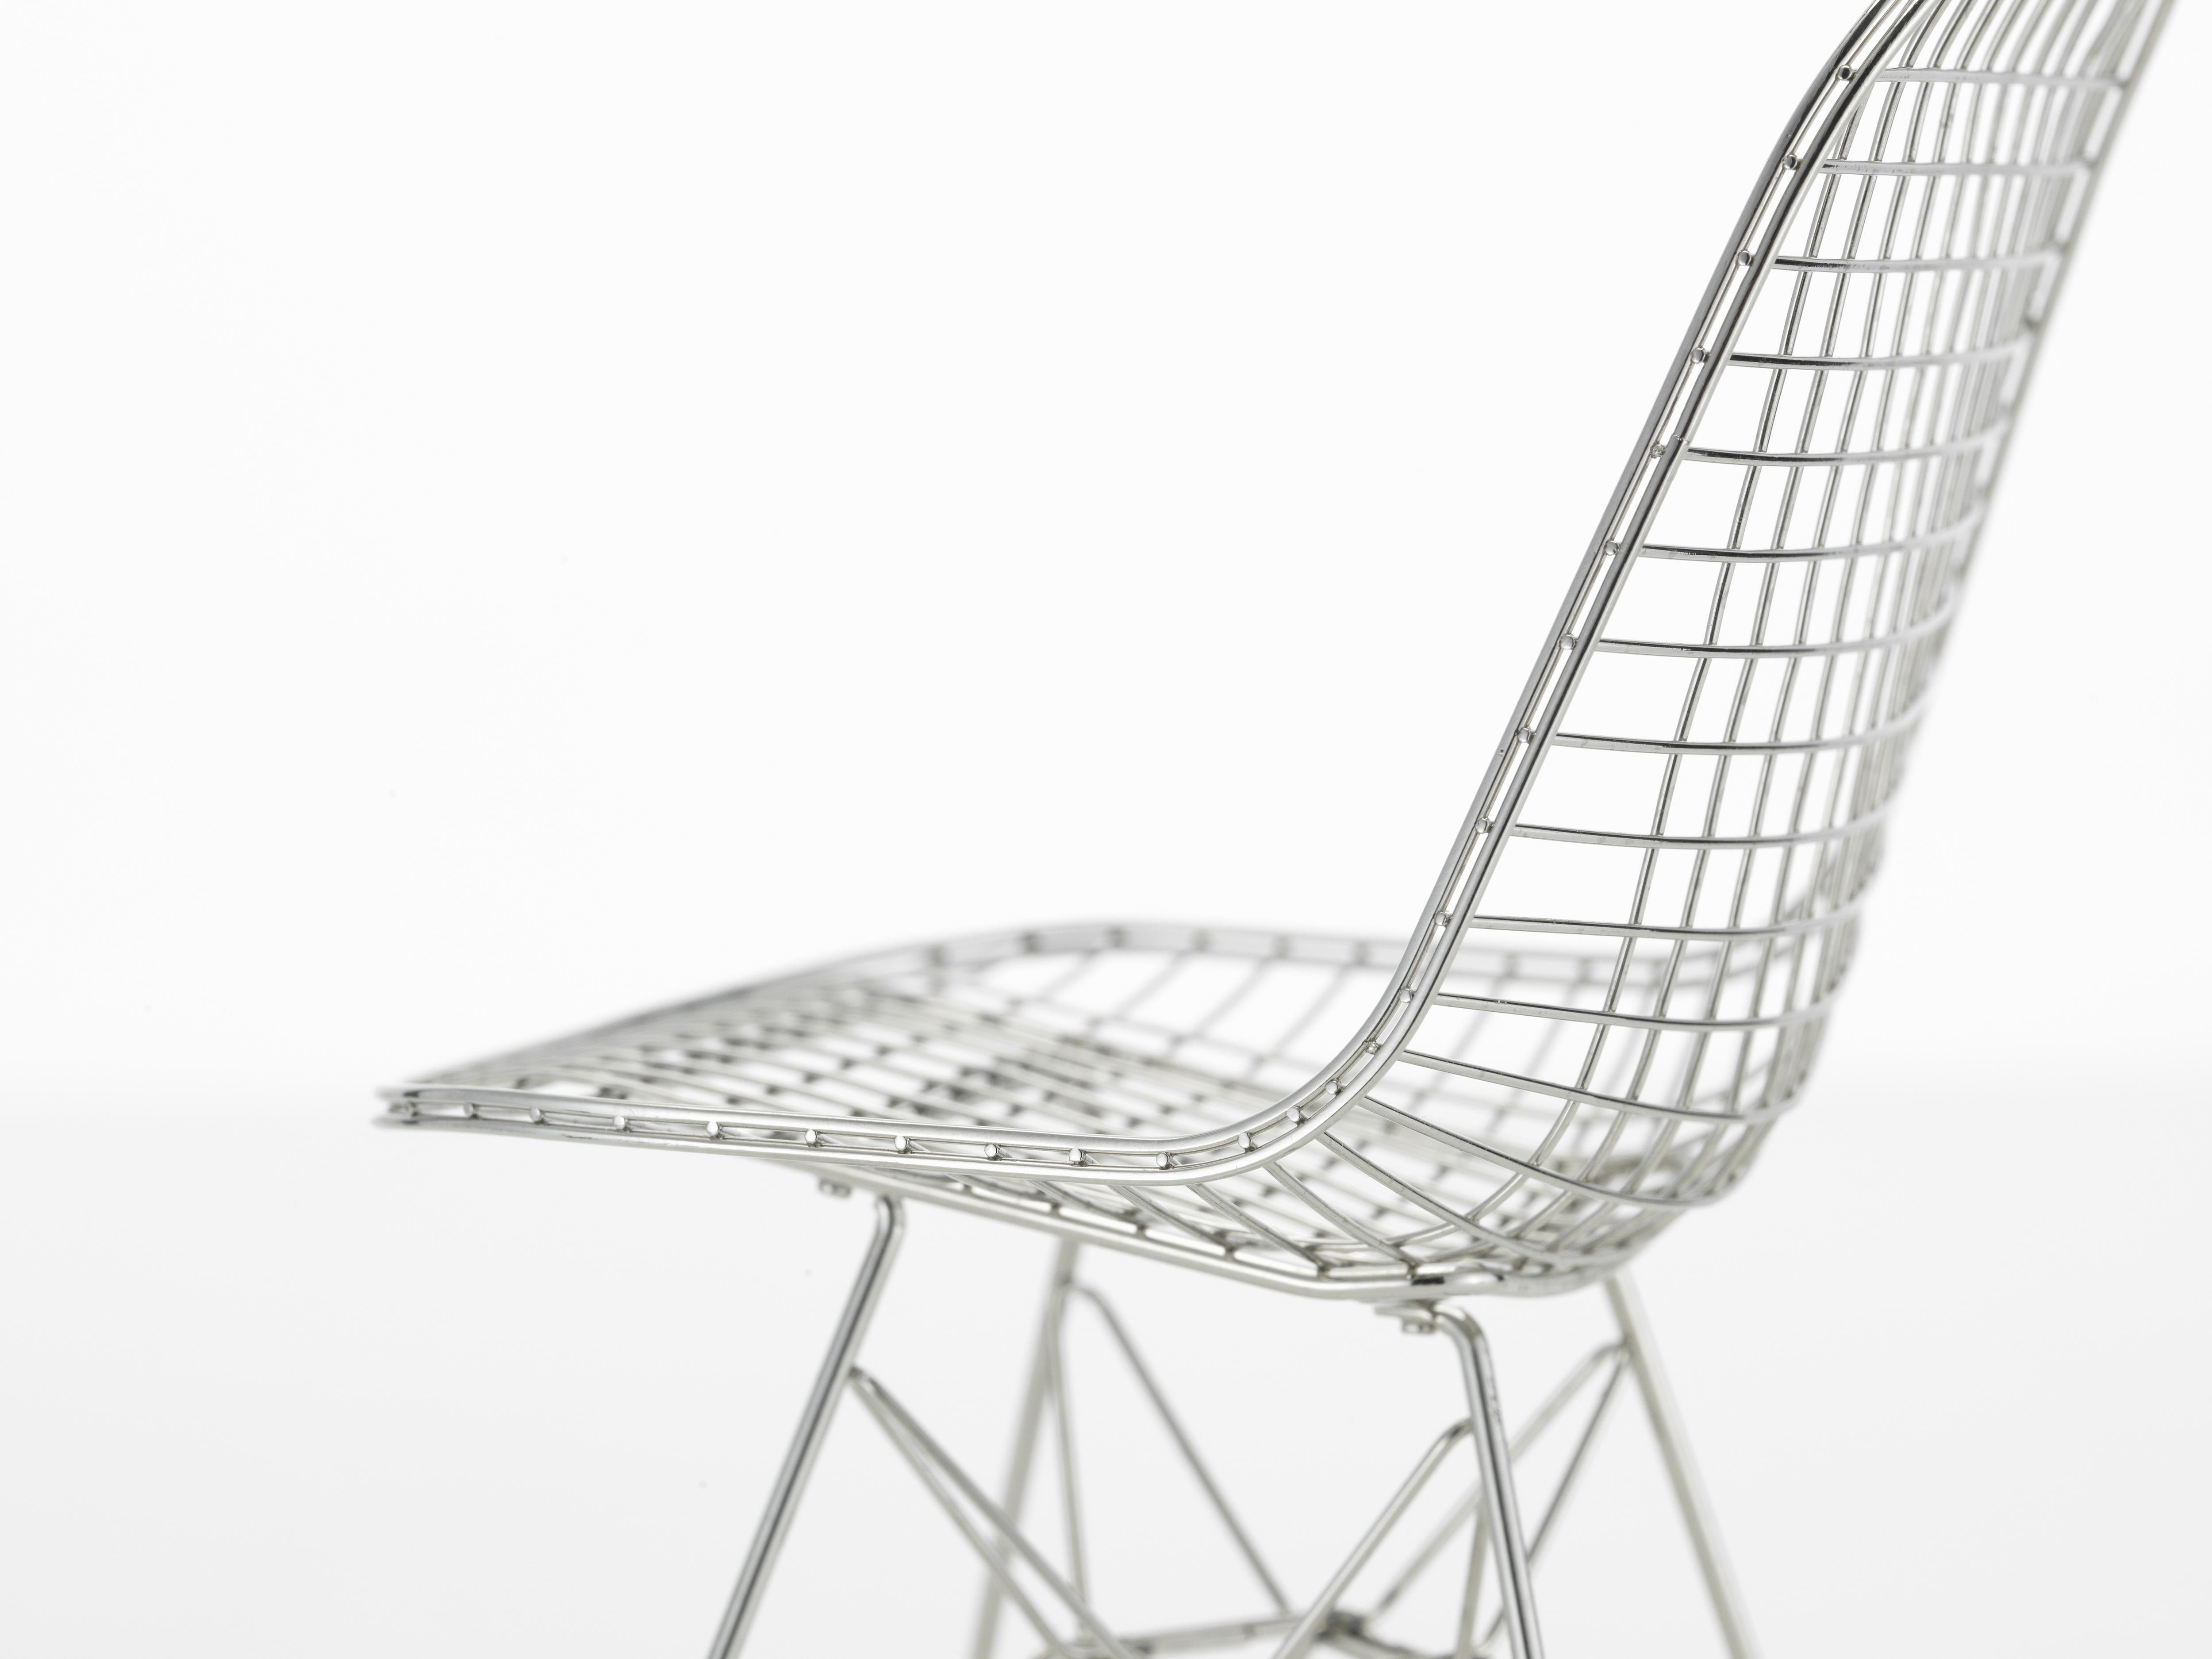 These items are currently only available in the United States.

Charles and Ray Eames developed this model in connection with the Low Cost Furniture competition held by the Museum of Modern Art in New York and for the Herman Miller company, who